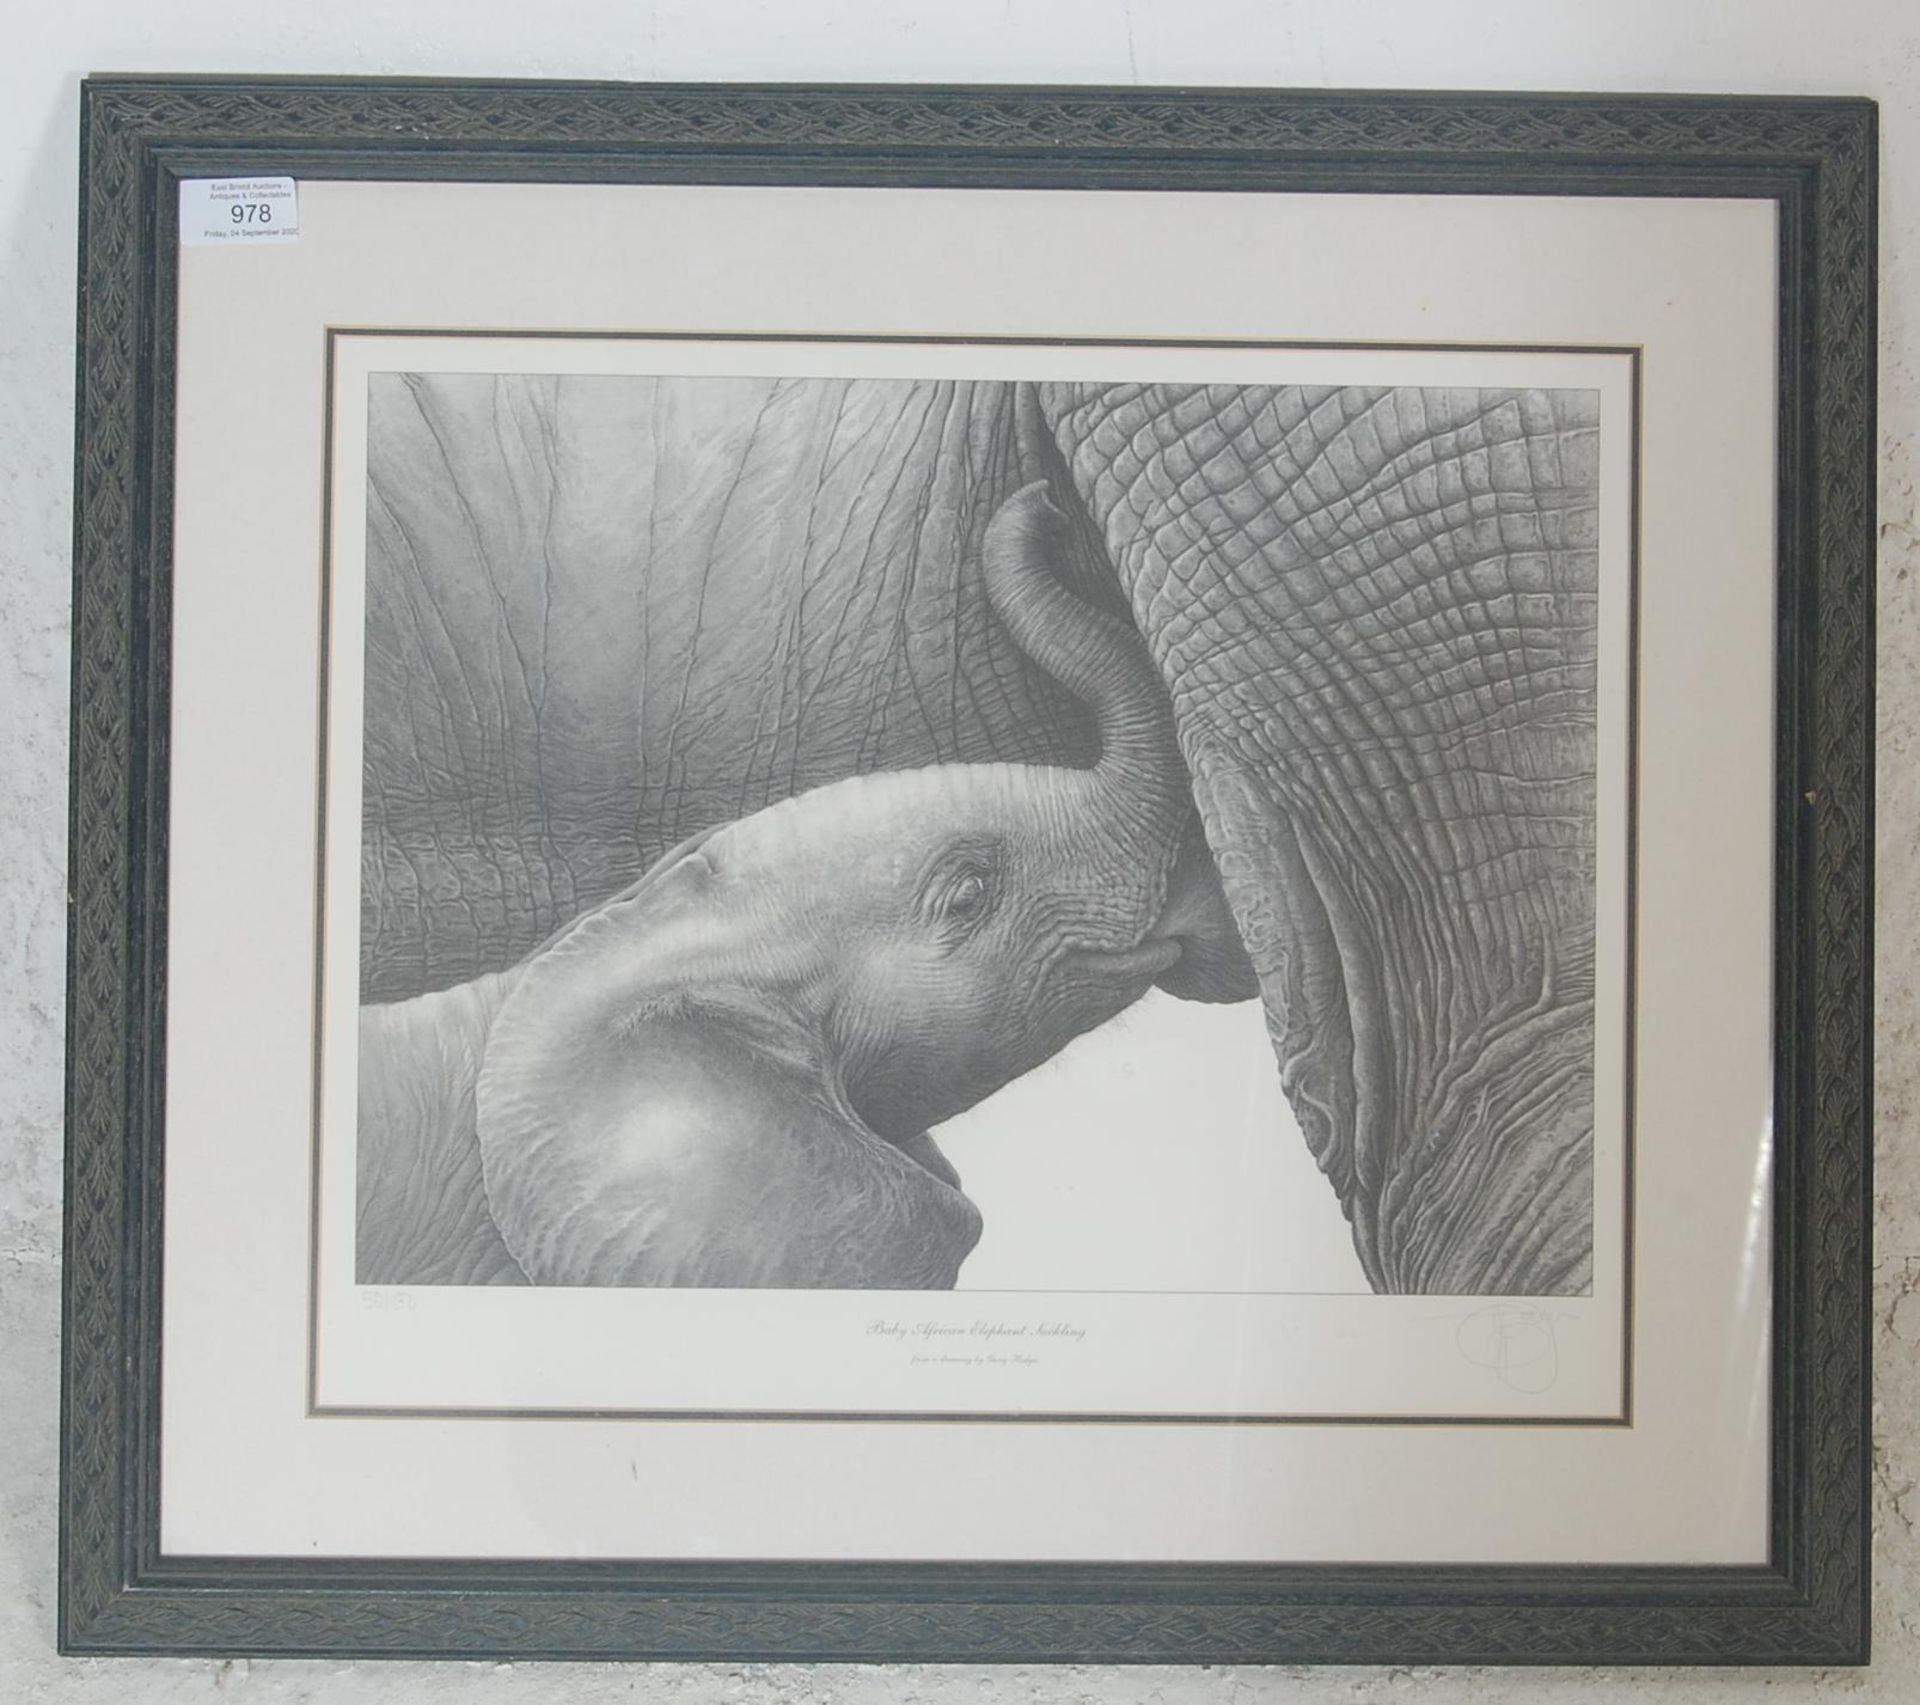 Gary Hodges (1954-) A retro vintage limited edition signed print of a pencil drawing of two